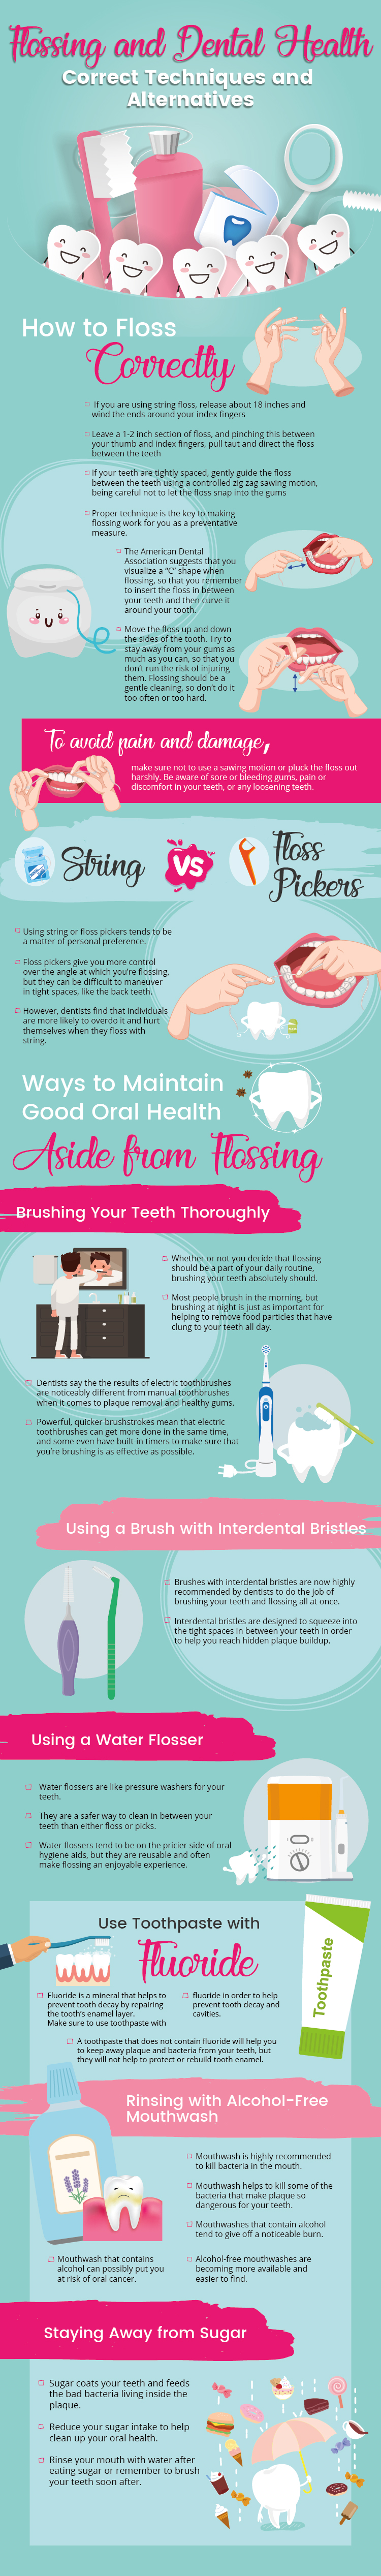 flossing infographic - Is Flossing Really Beneficial?